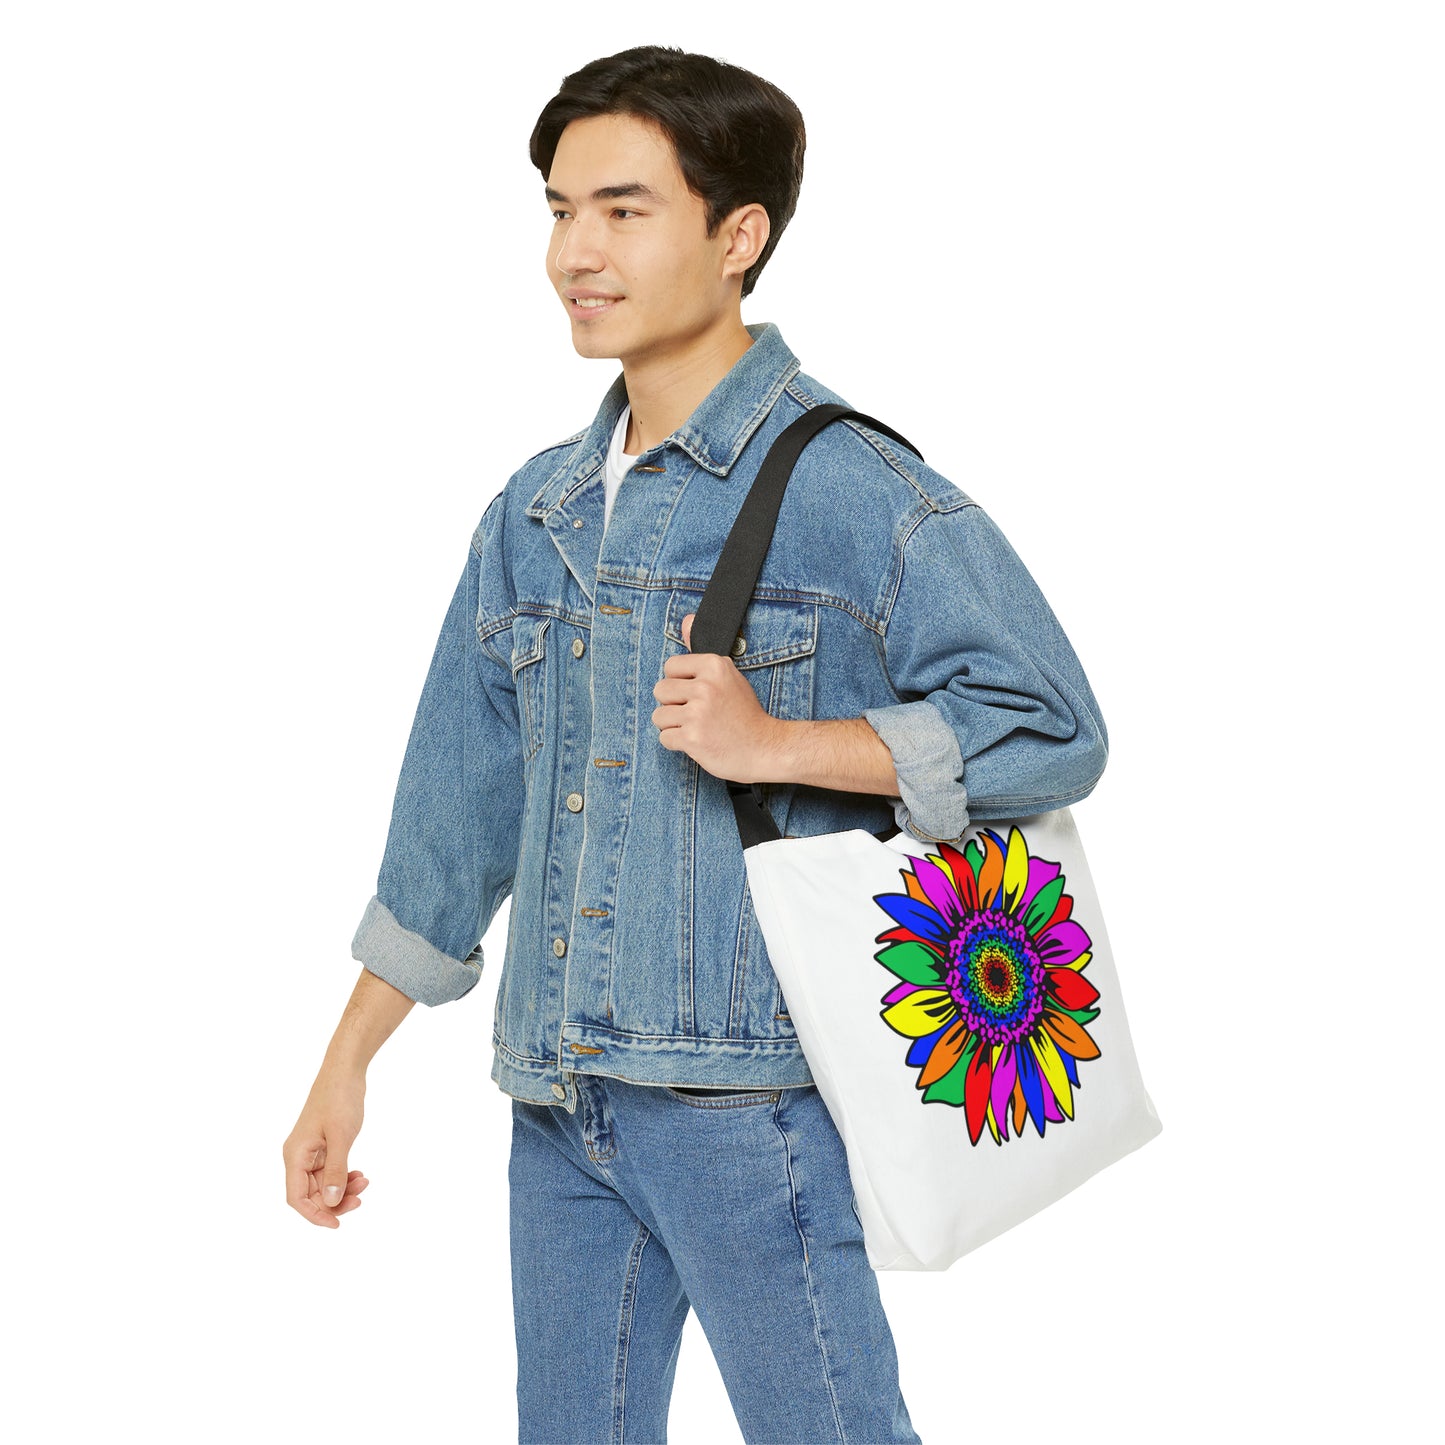 Mock up of a man carrying the 16" bag